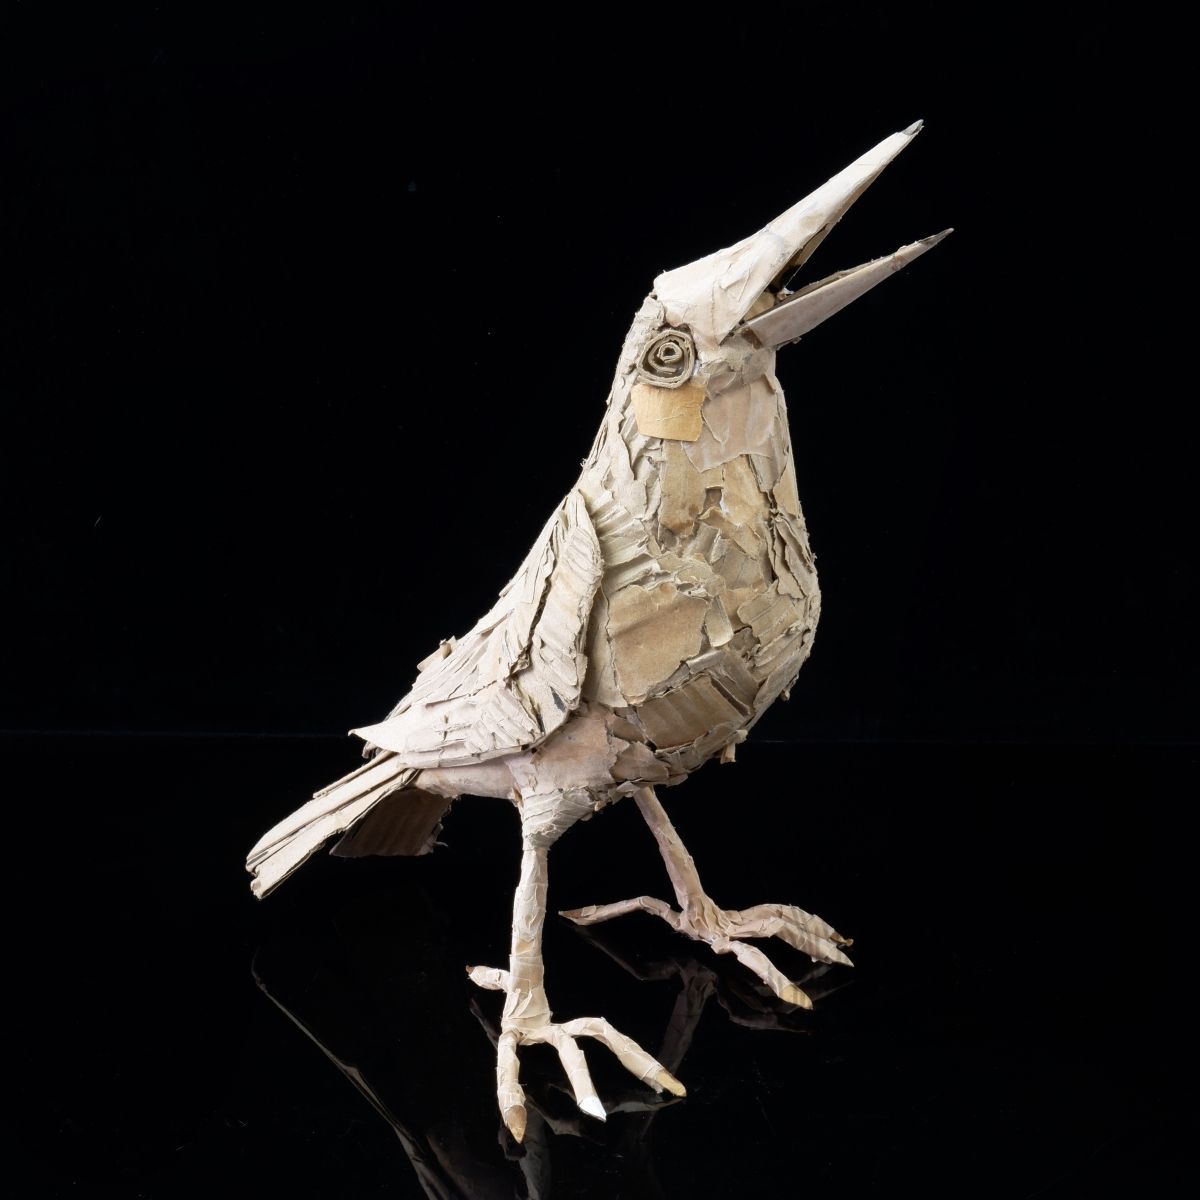 A small bird sculpture standing freely. The bird is made from cardboard and other recycled materials.